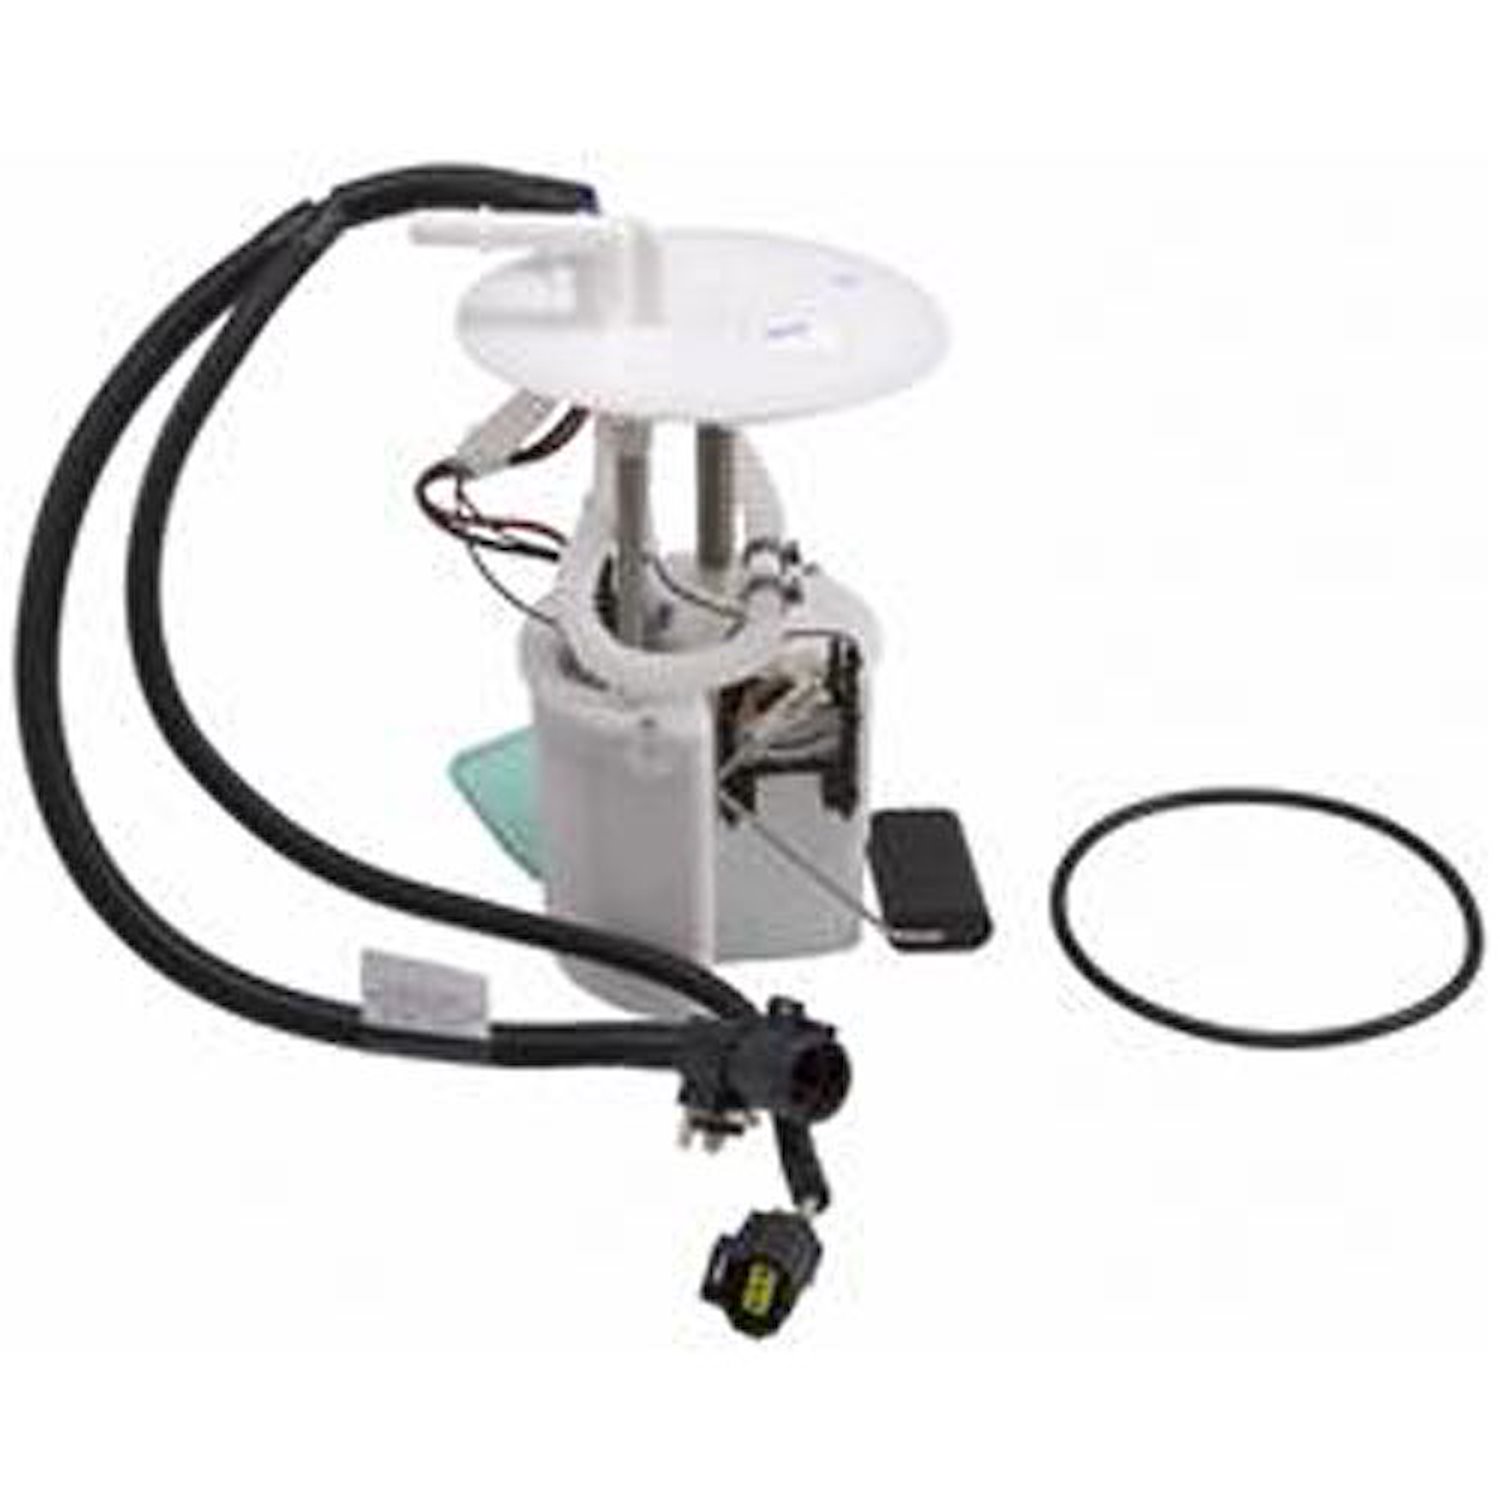 OE Ford Replacement Electric Fuel Pump Module Assembly 2000 Ford Taurus 3.0L V6